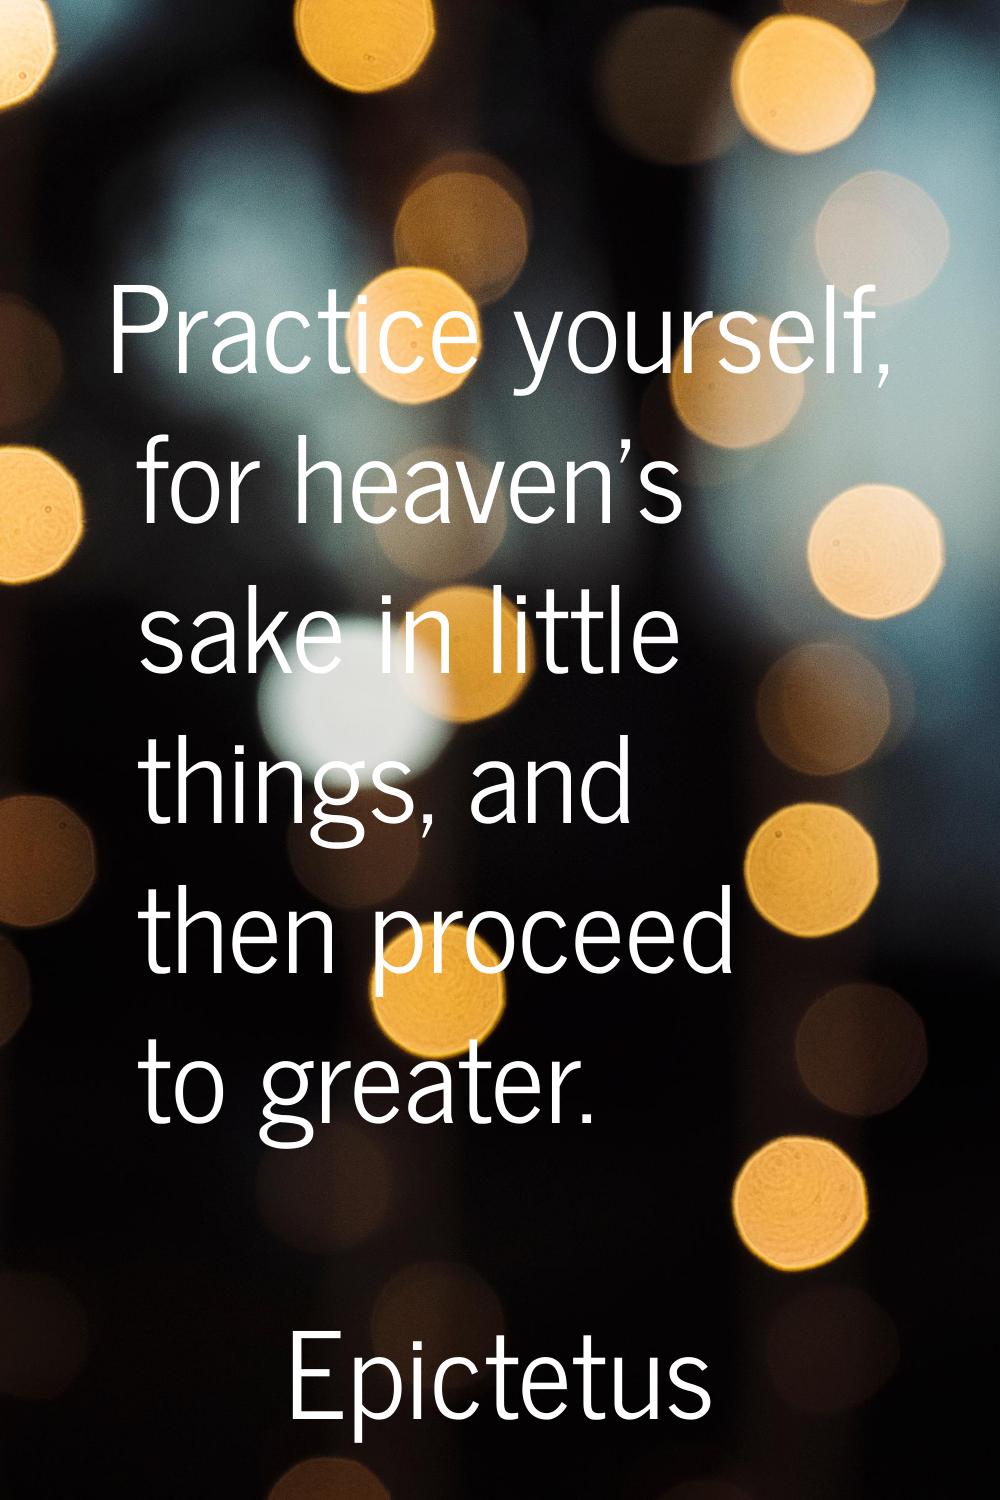 Practice yourself, for heaven's sake in little things, and then proceed to greater.